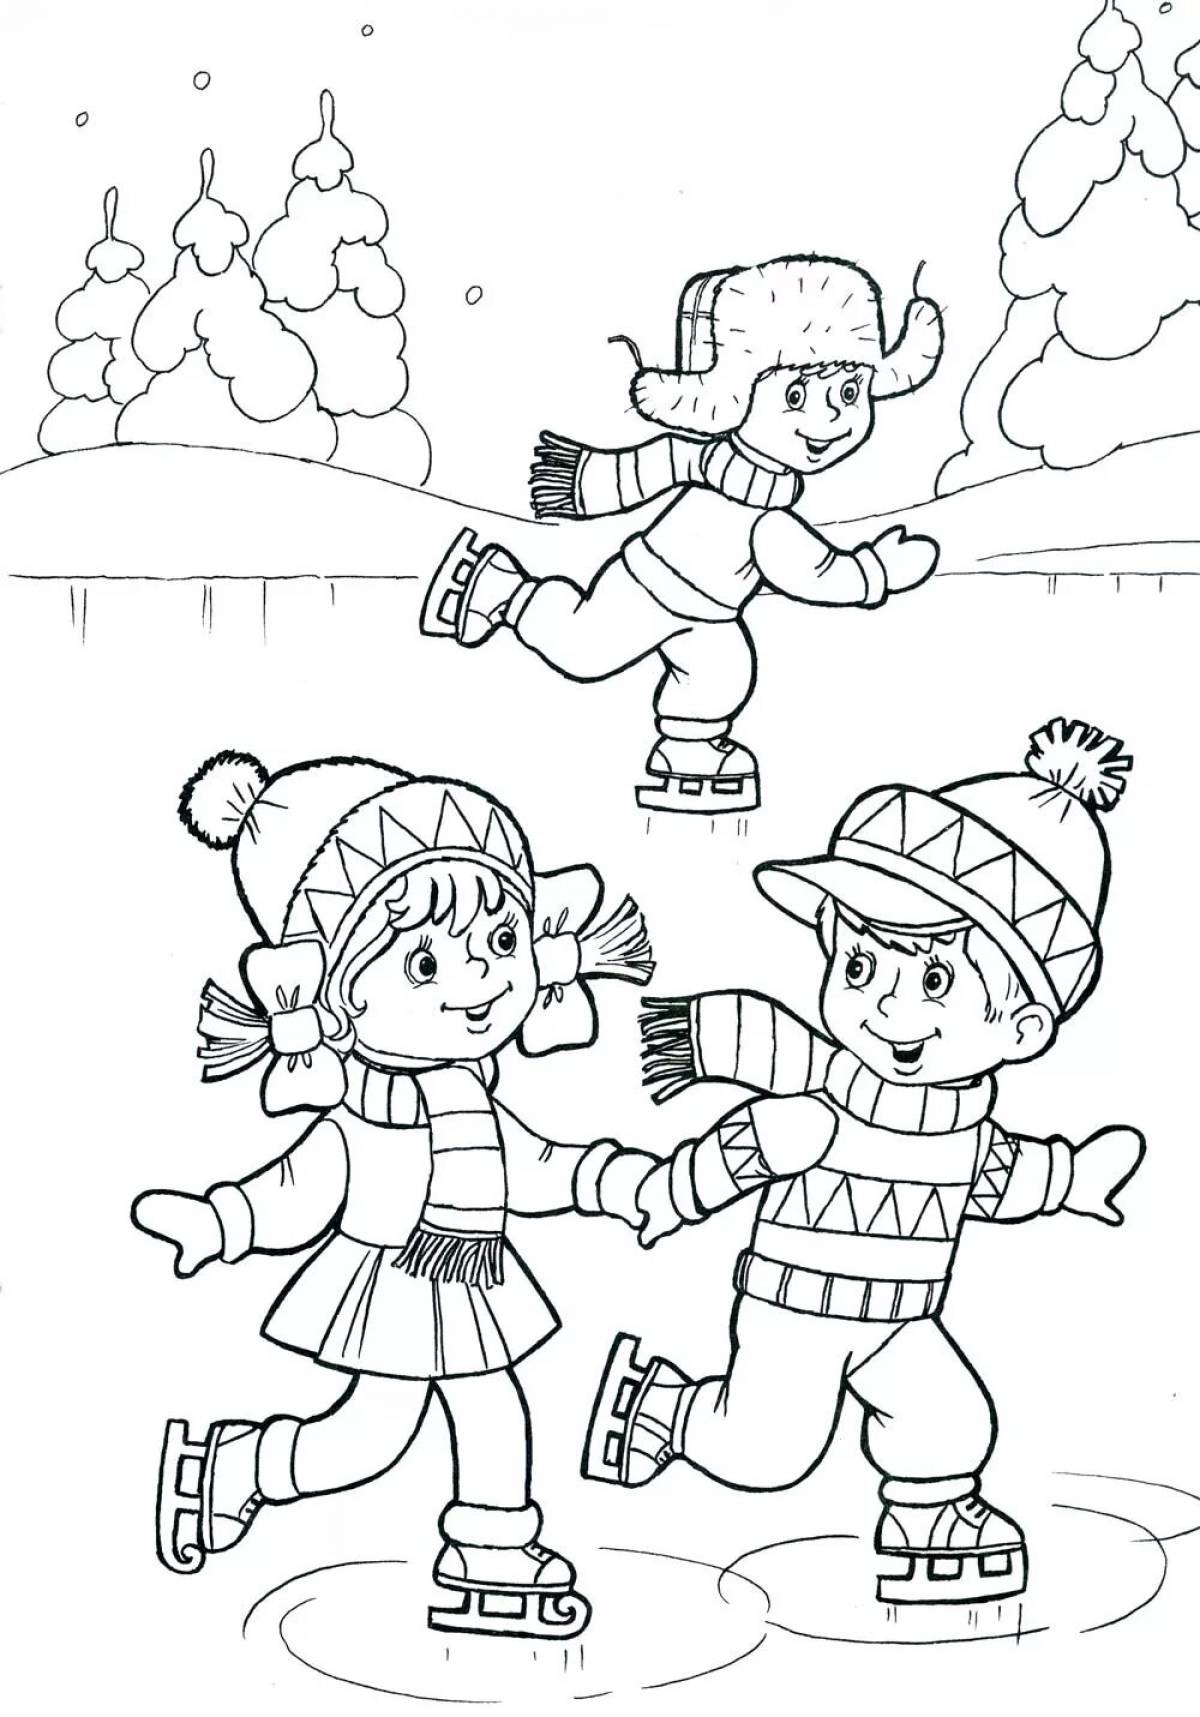 Winter holidays for kids #7